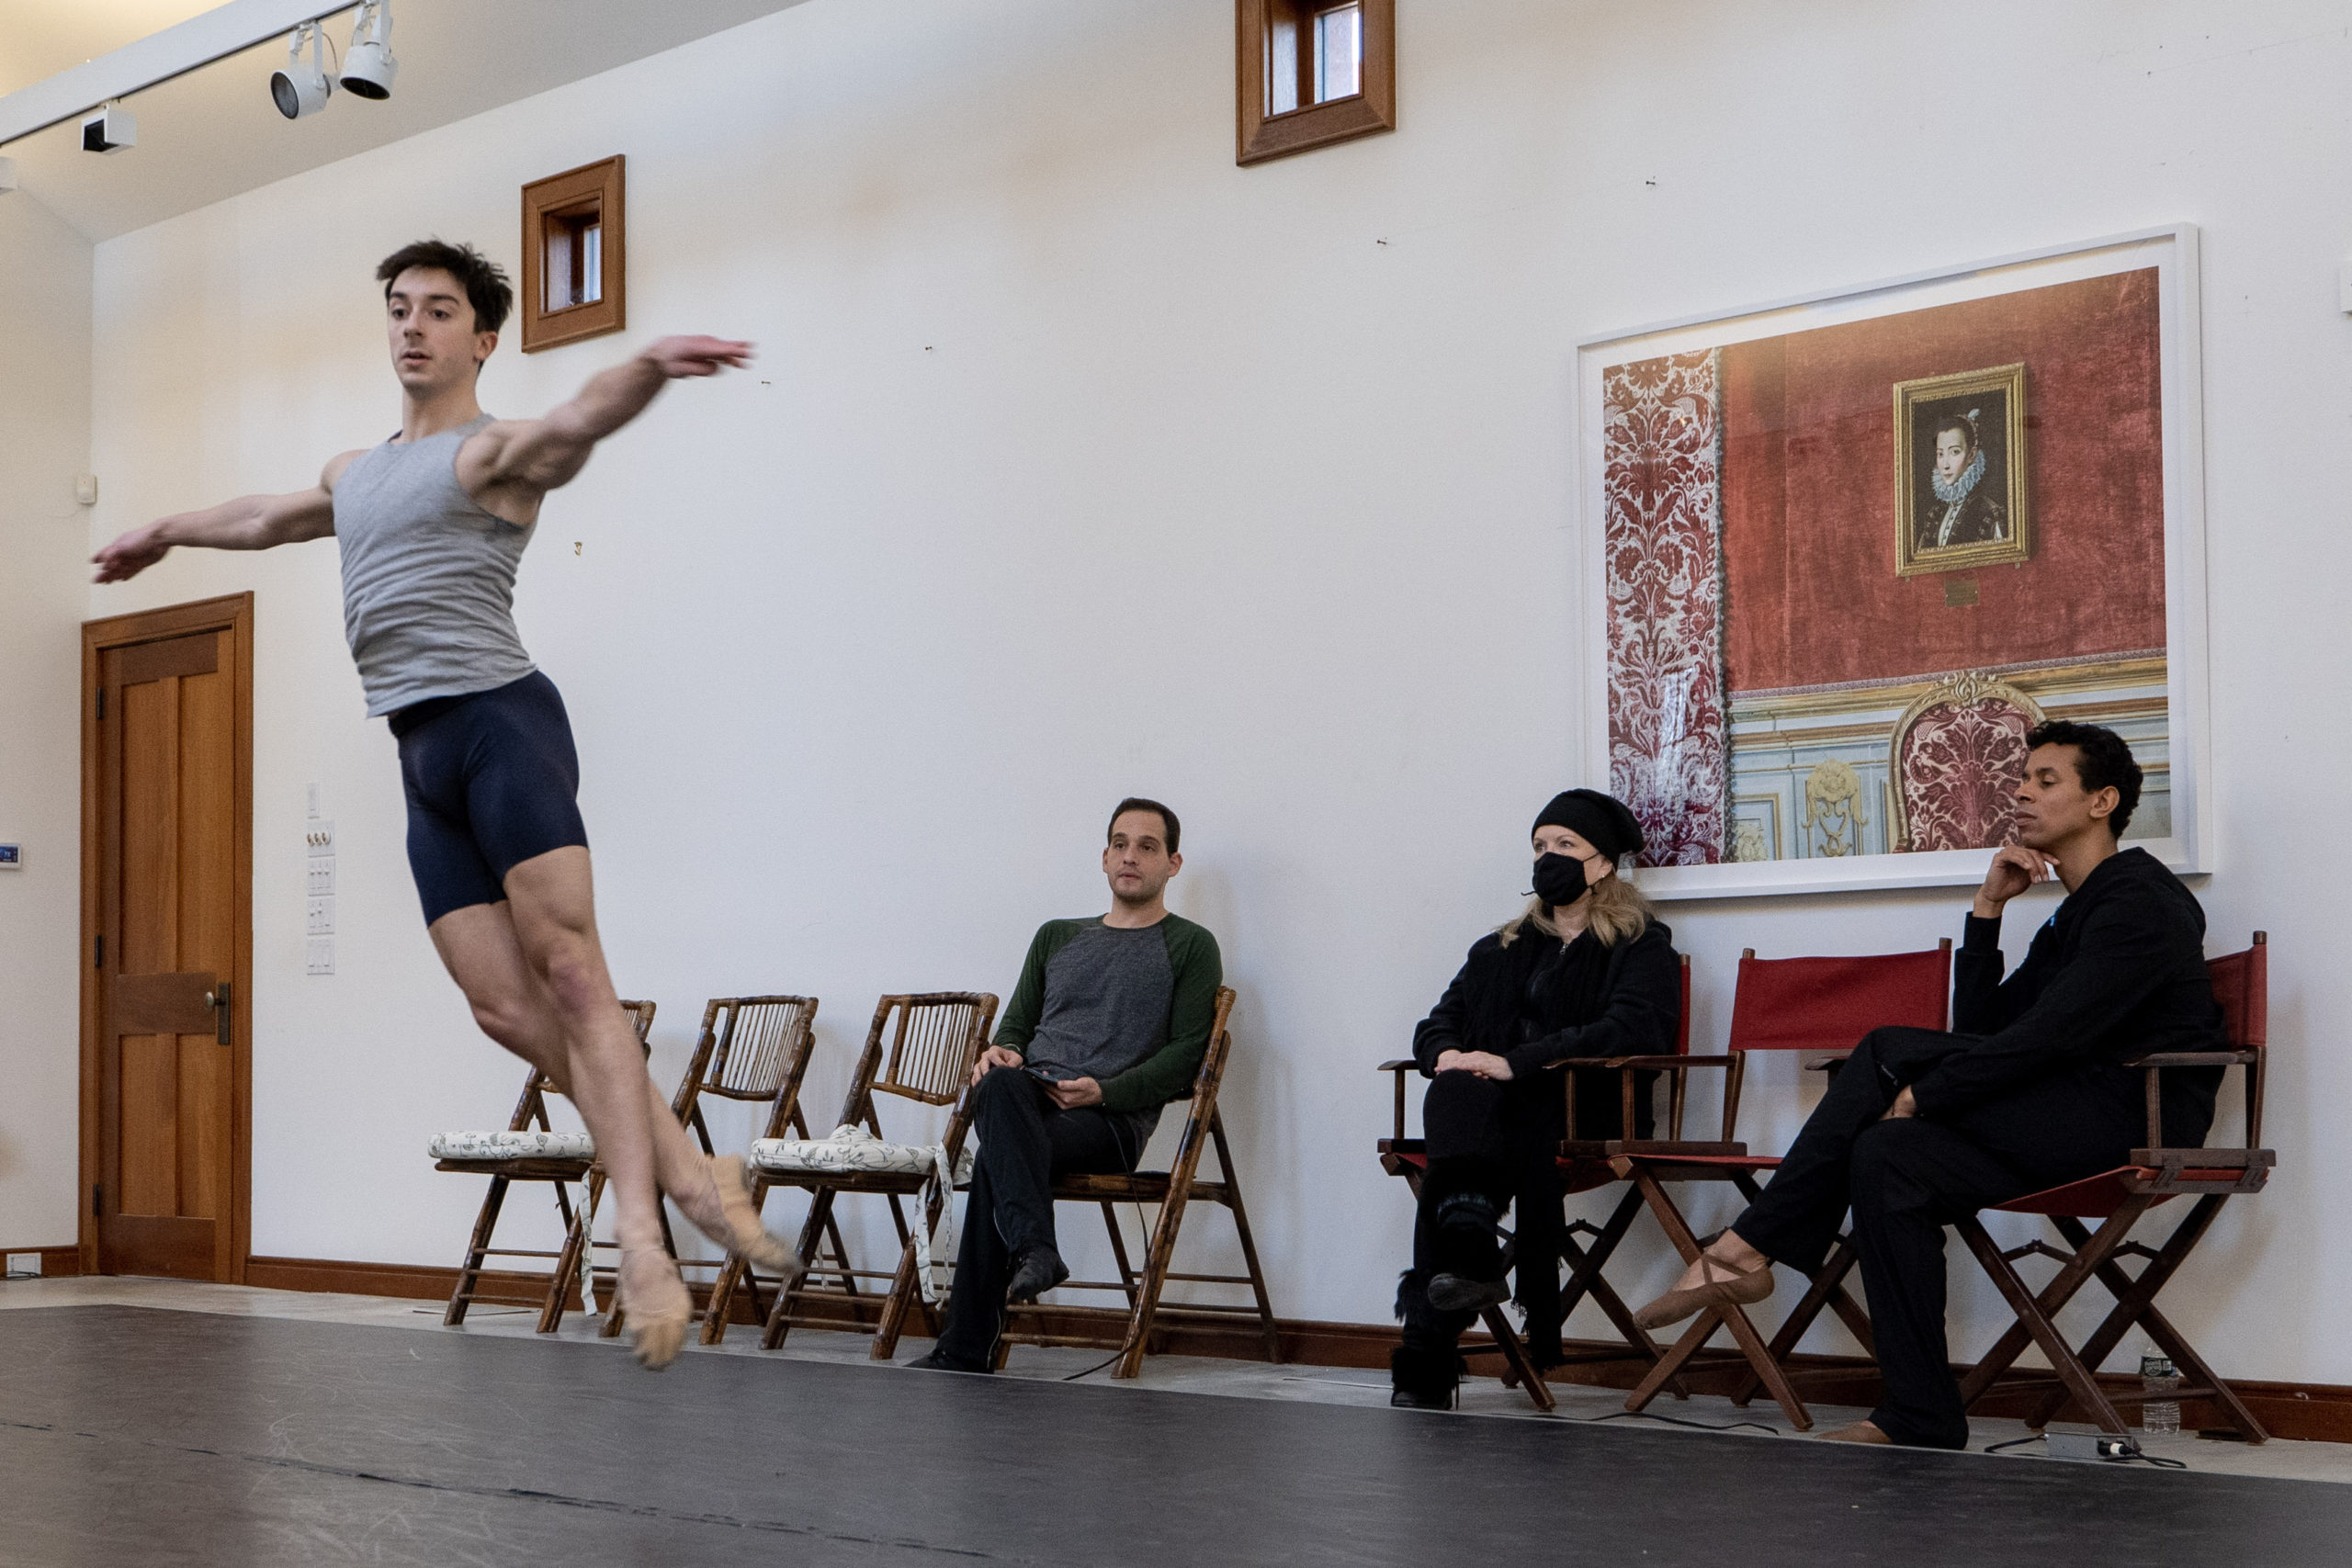 Hamptons Dance Project in rehearsal at the Guild Hall William P. Rayner Artist-in-Residence studio with creative mentor Susan Stroman. Pictured: Dancer Tyler Maloney is observed by Craig Salstein, Susan Stroman and Jose Sebastian. © JOE BRONDO FOR GUILD HALL